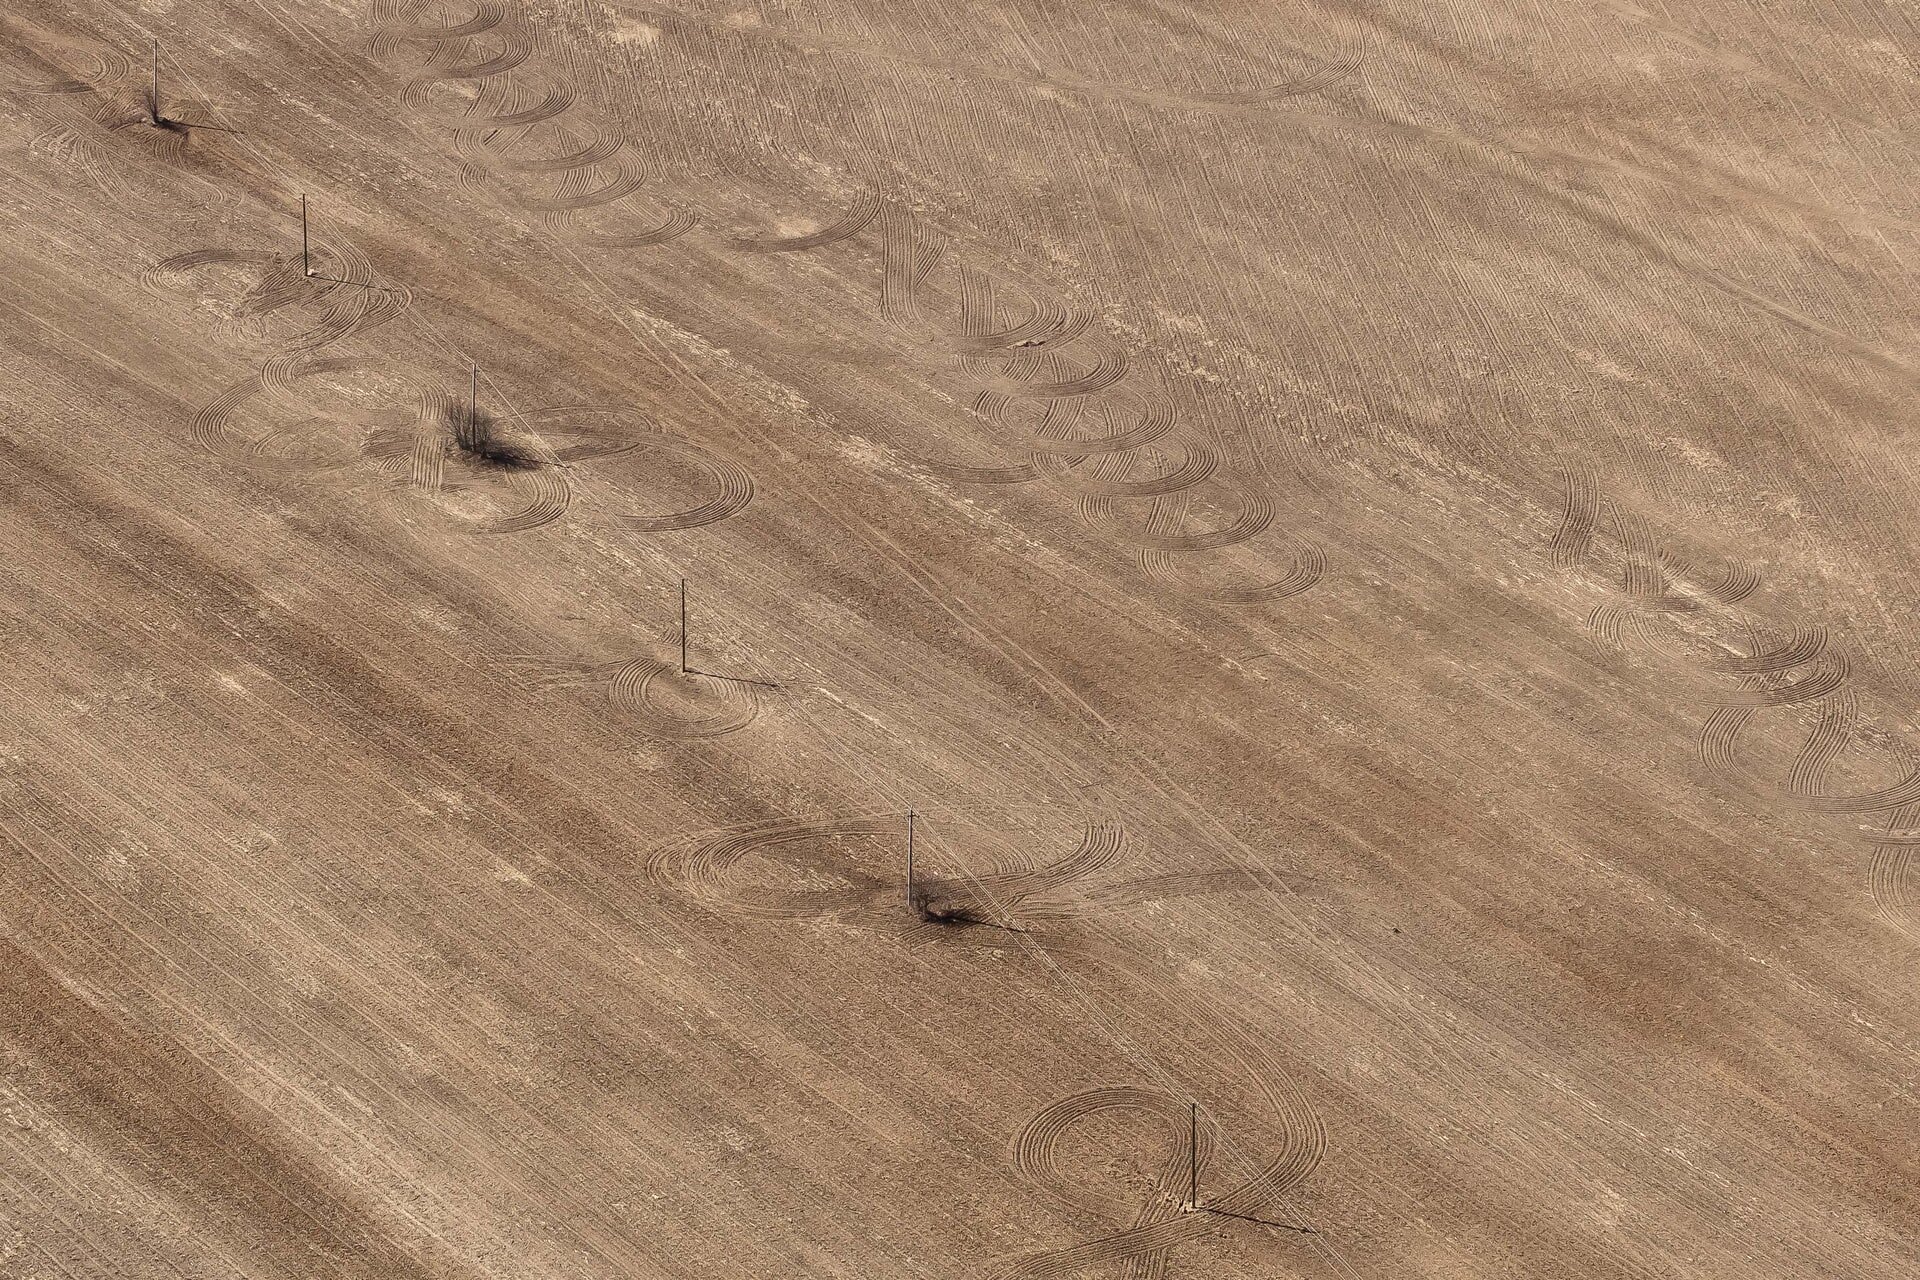 An aerial view of a dry field with tire marks across it in the dirt. Image credit: Vladimir Chuchadeev